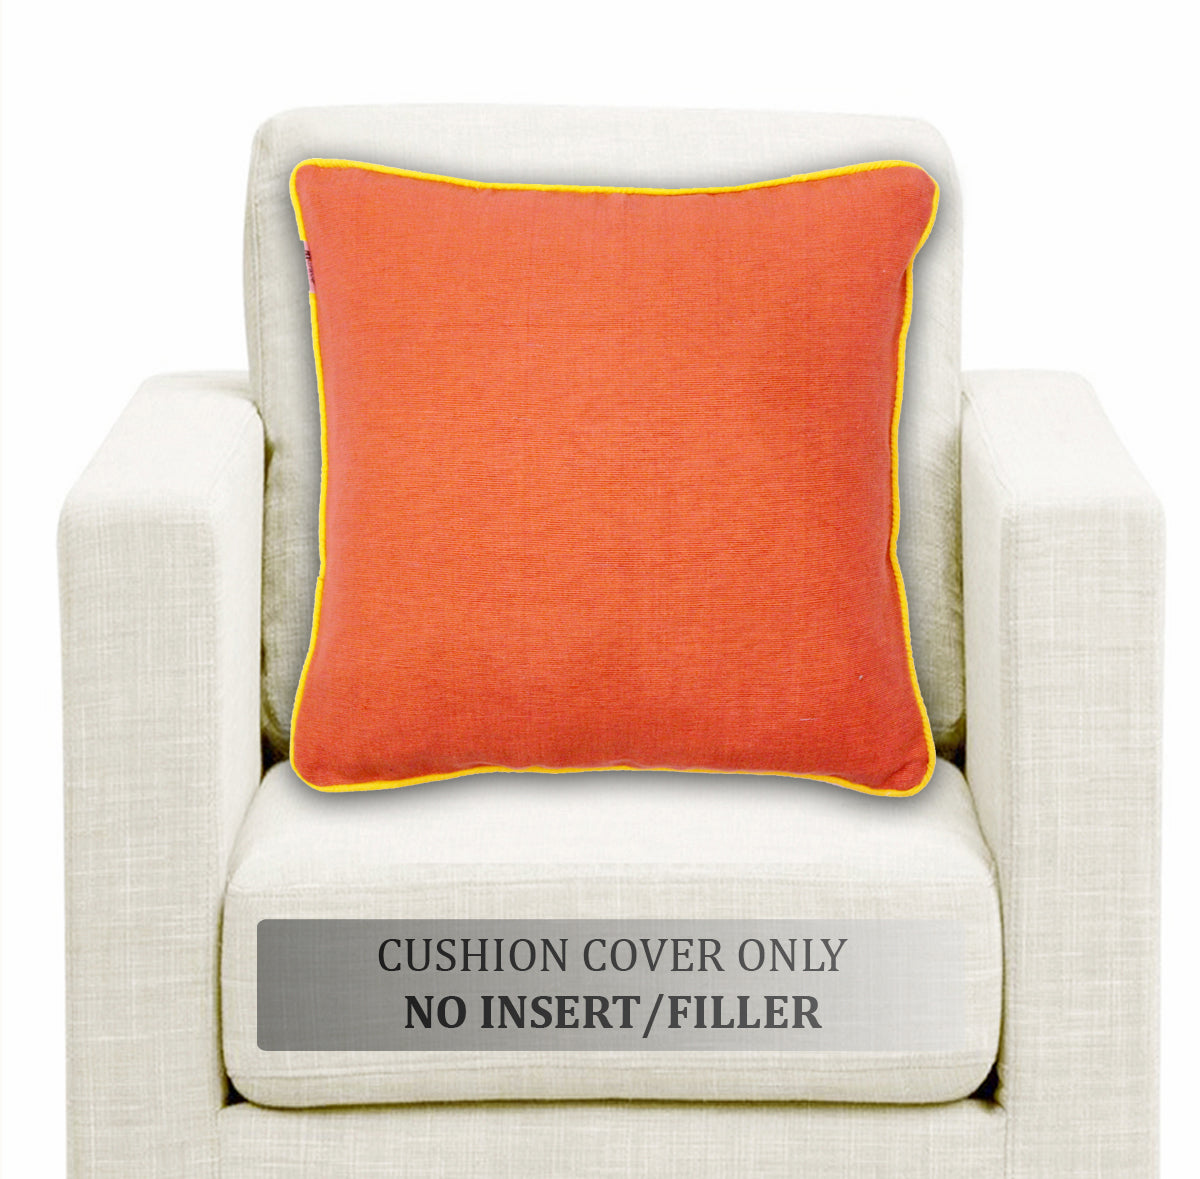 Soft Woven Corded Stripe Cotton Cushion Cover Set in Orange online (1Pc)